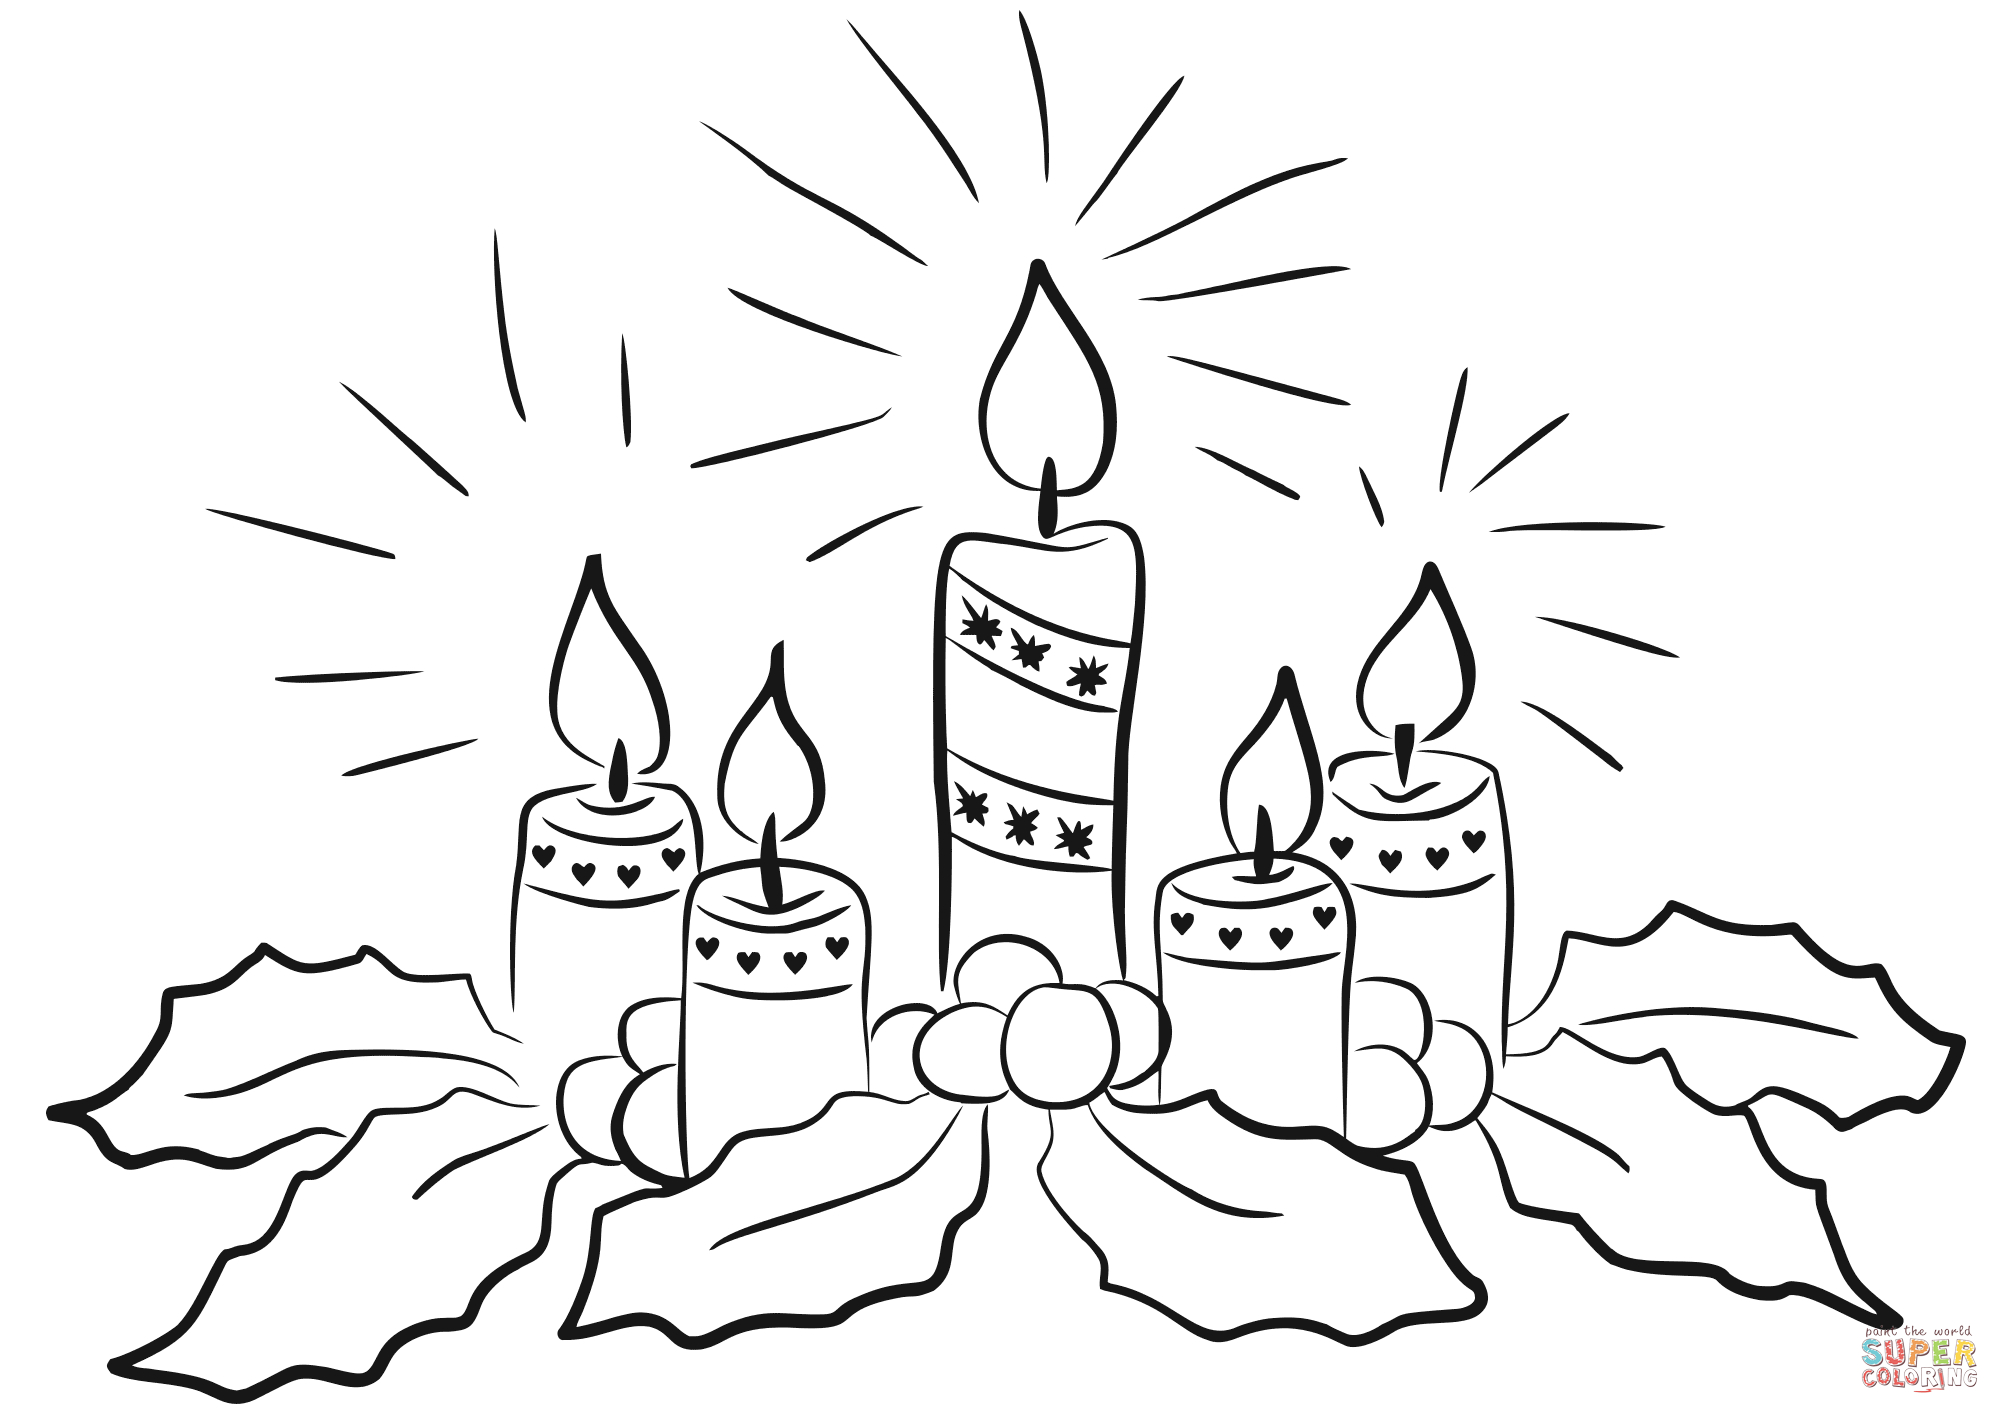 Advent Candles Coloring Page | Free Printable Coloring Pages - Free Printable Advent Wreath